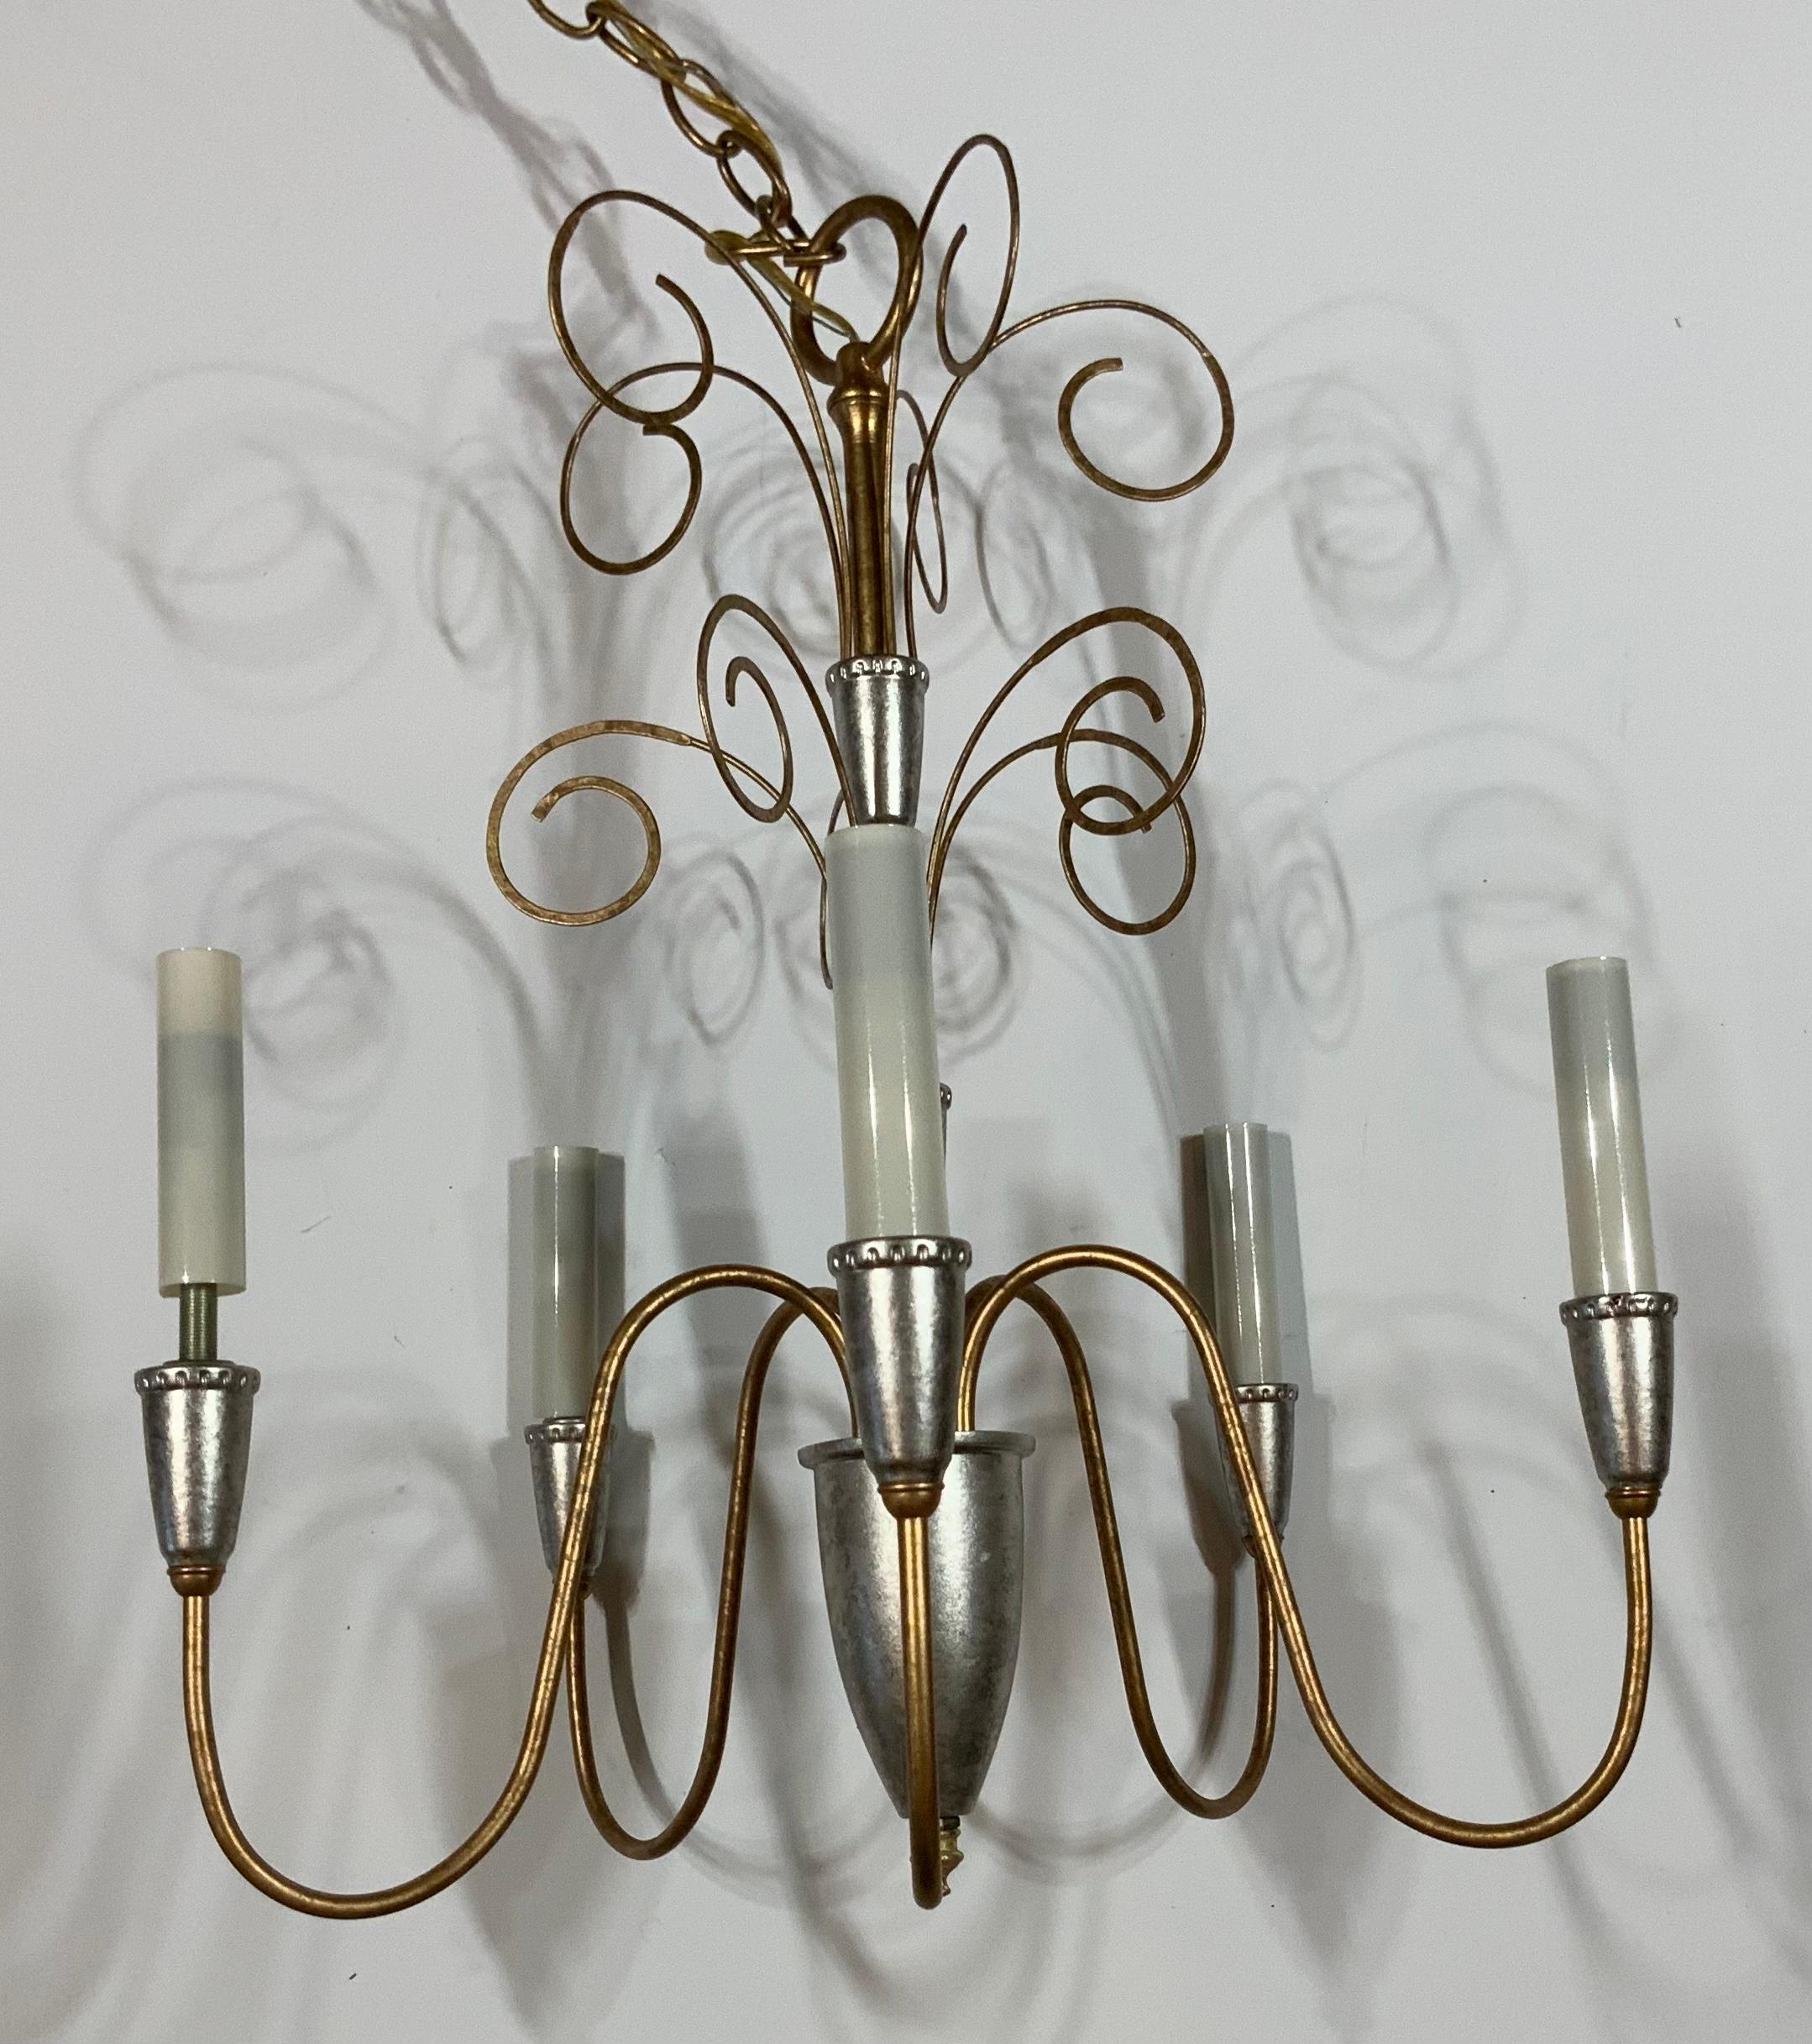 Elegant chandelier made of metal, painted in silver and gold, with five stems 60/watt light each stem 
Electrified and ready to use. Beautiful and clean cut chandelier for any room 
One more is posted
Original canopy and chain included.
    